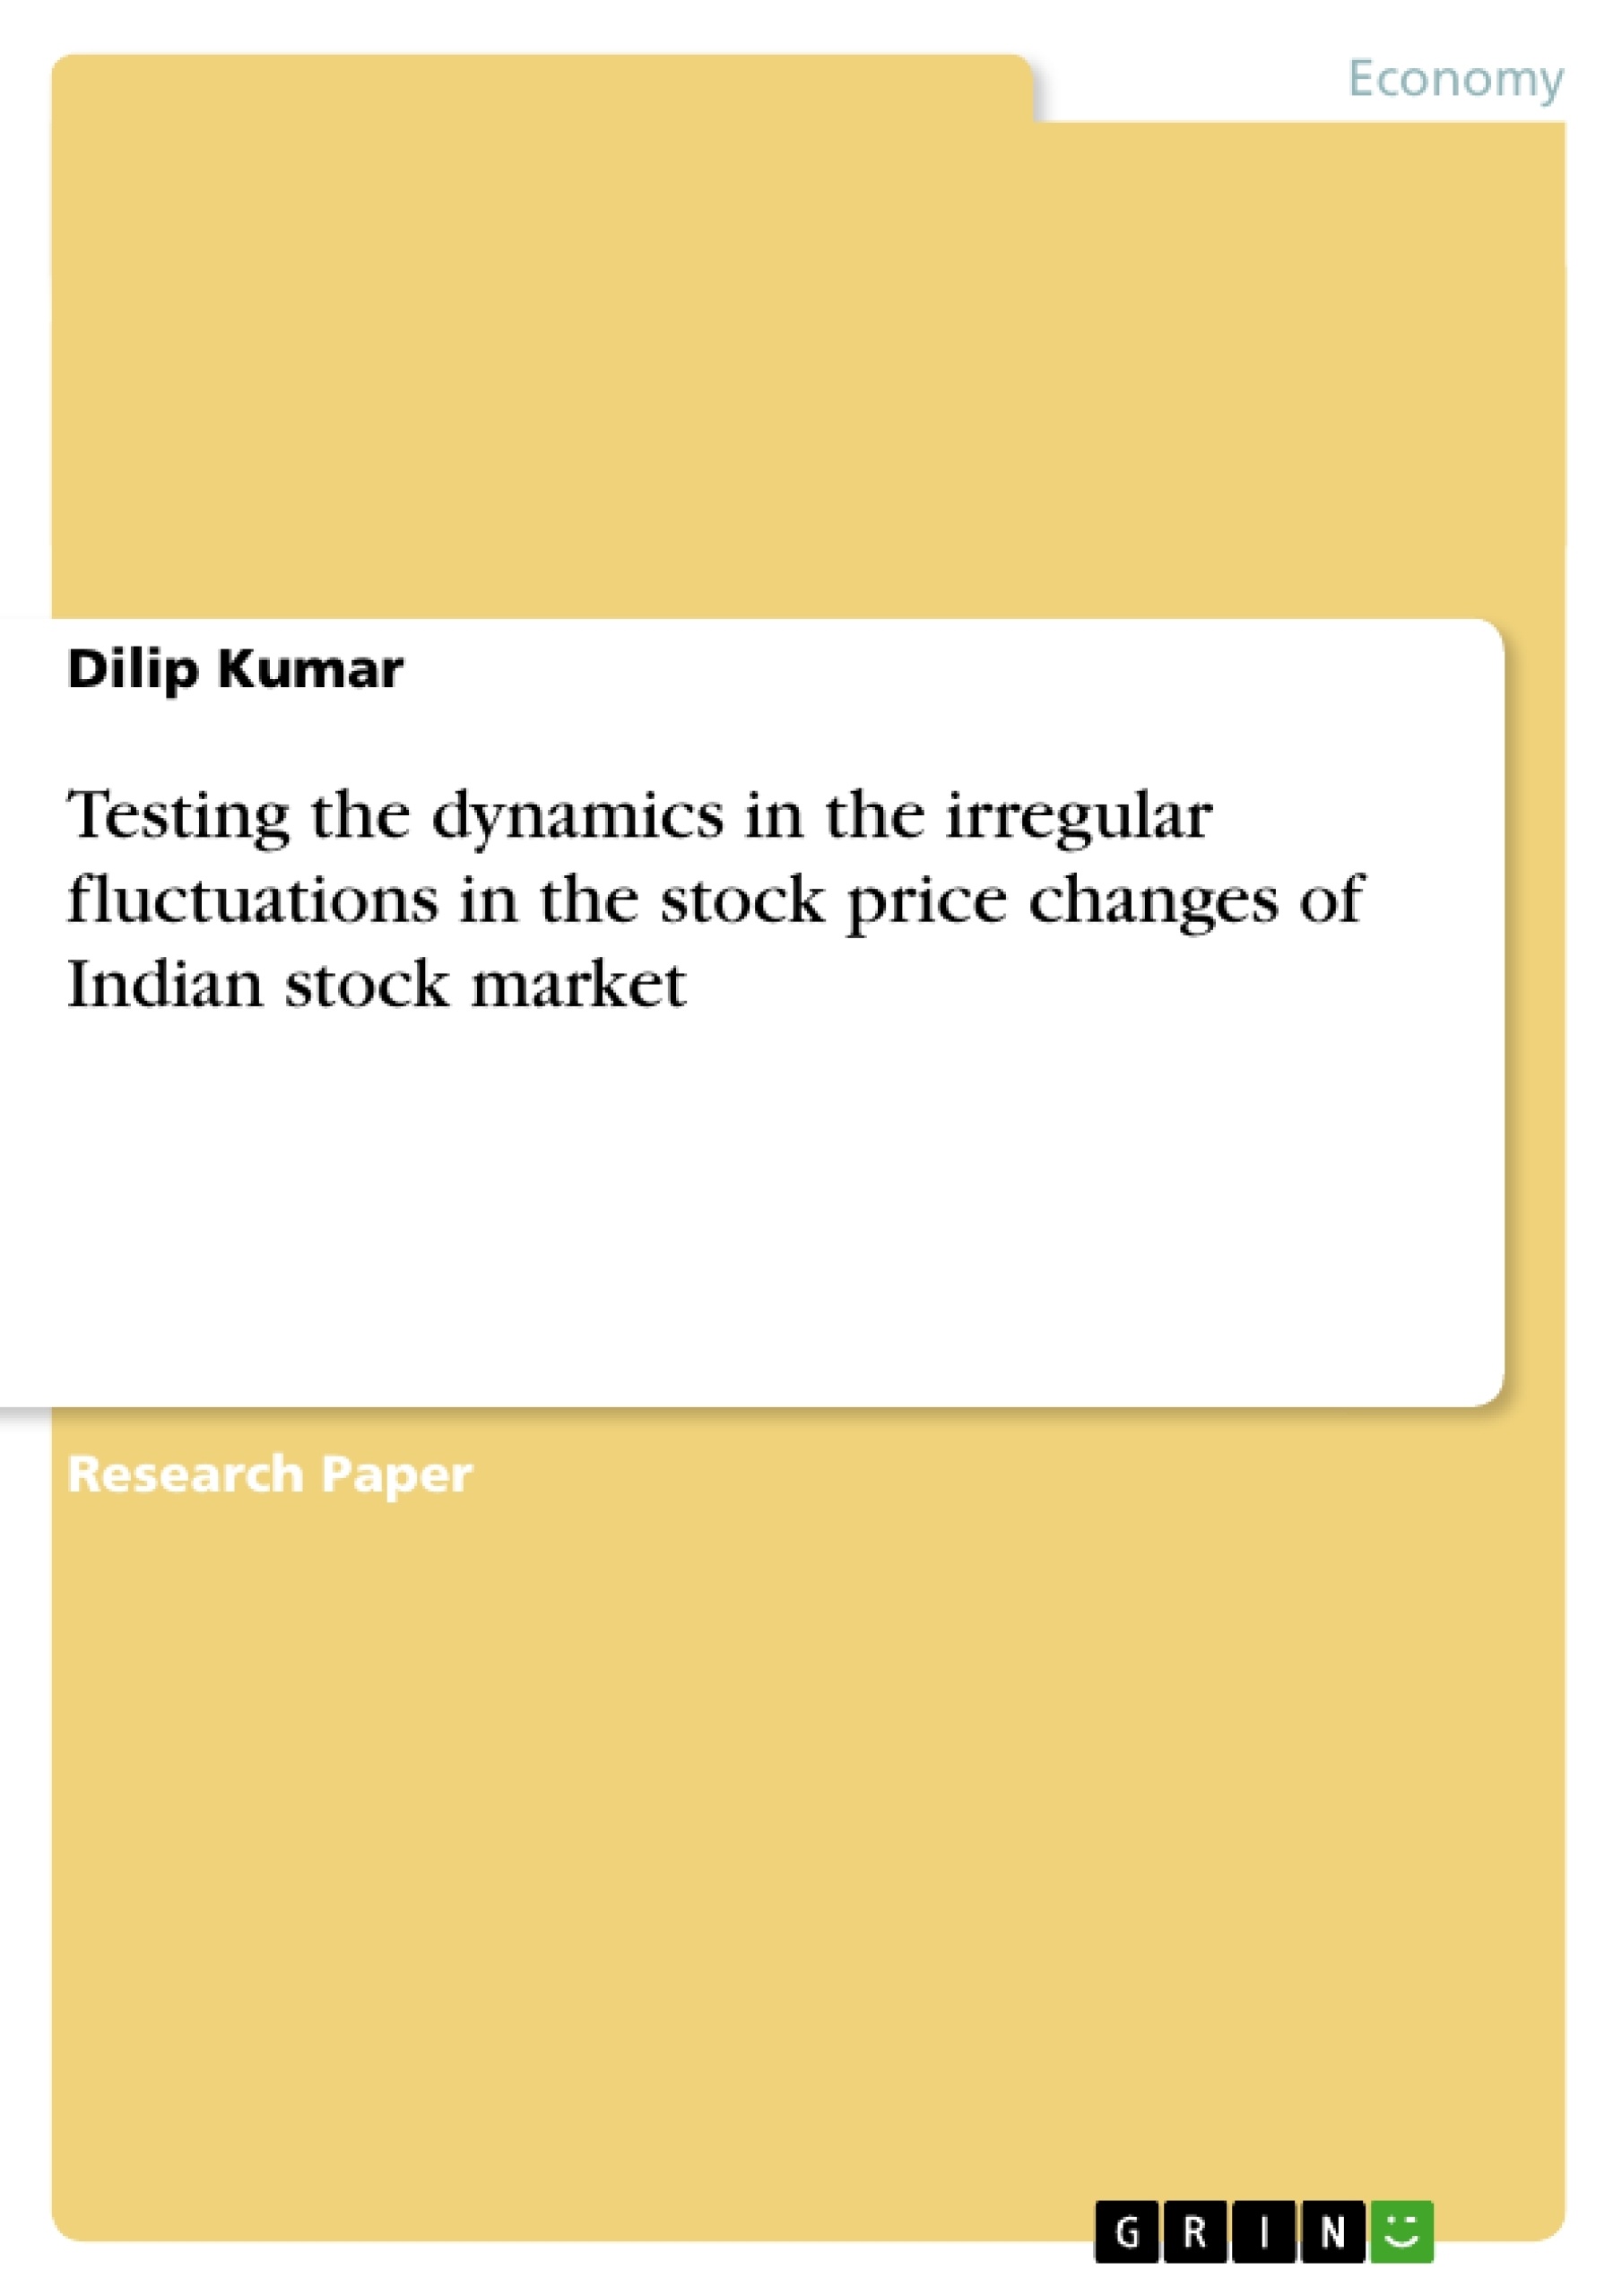 Título: Testing the dynamics in the irregular fluctuations in the stock price changes of Indian stock market